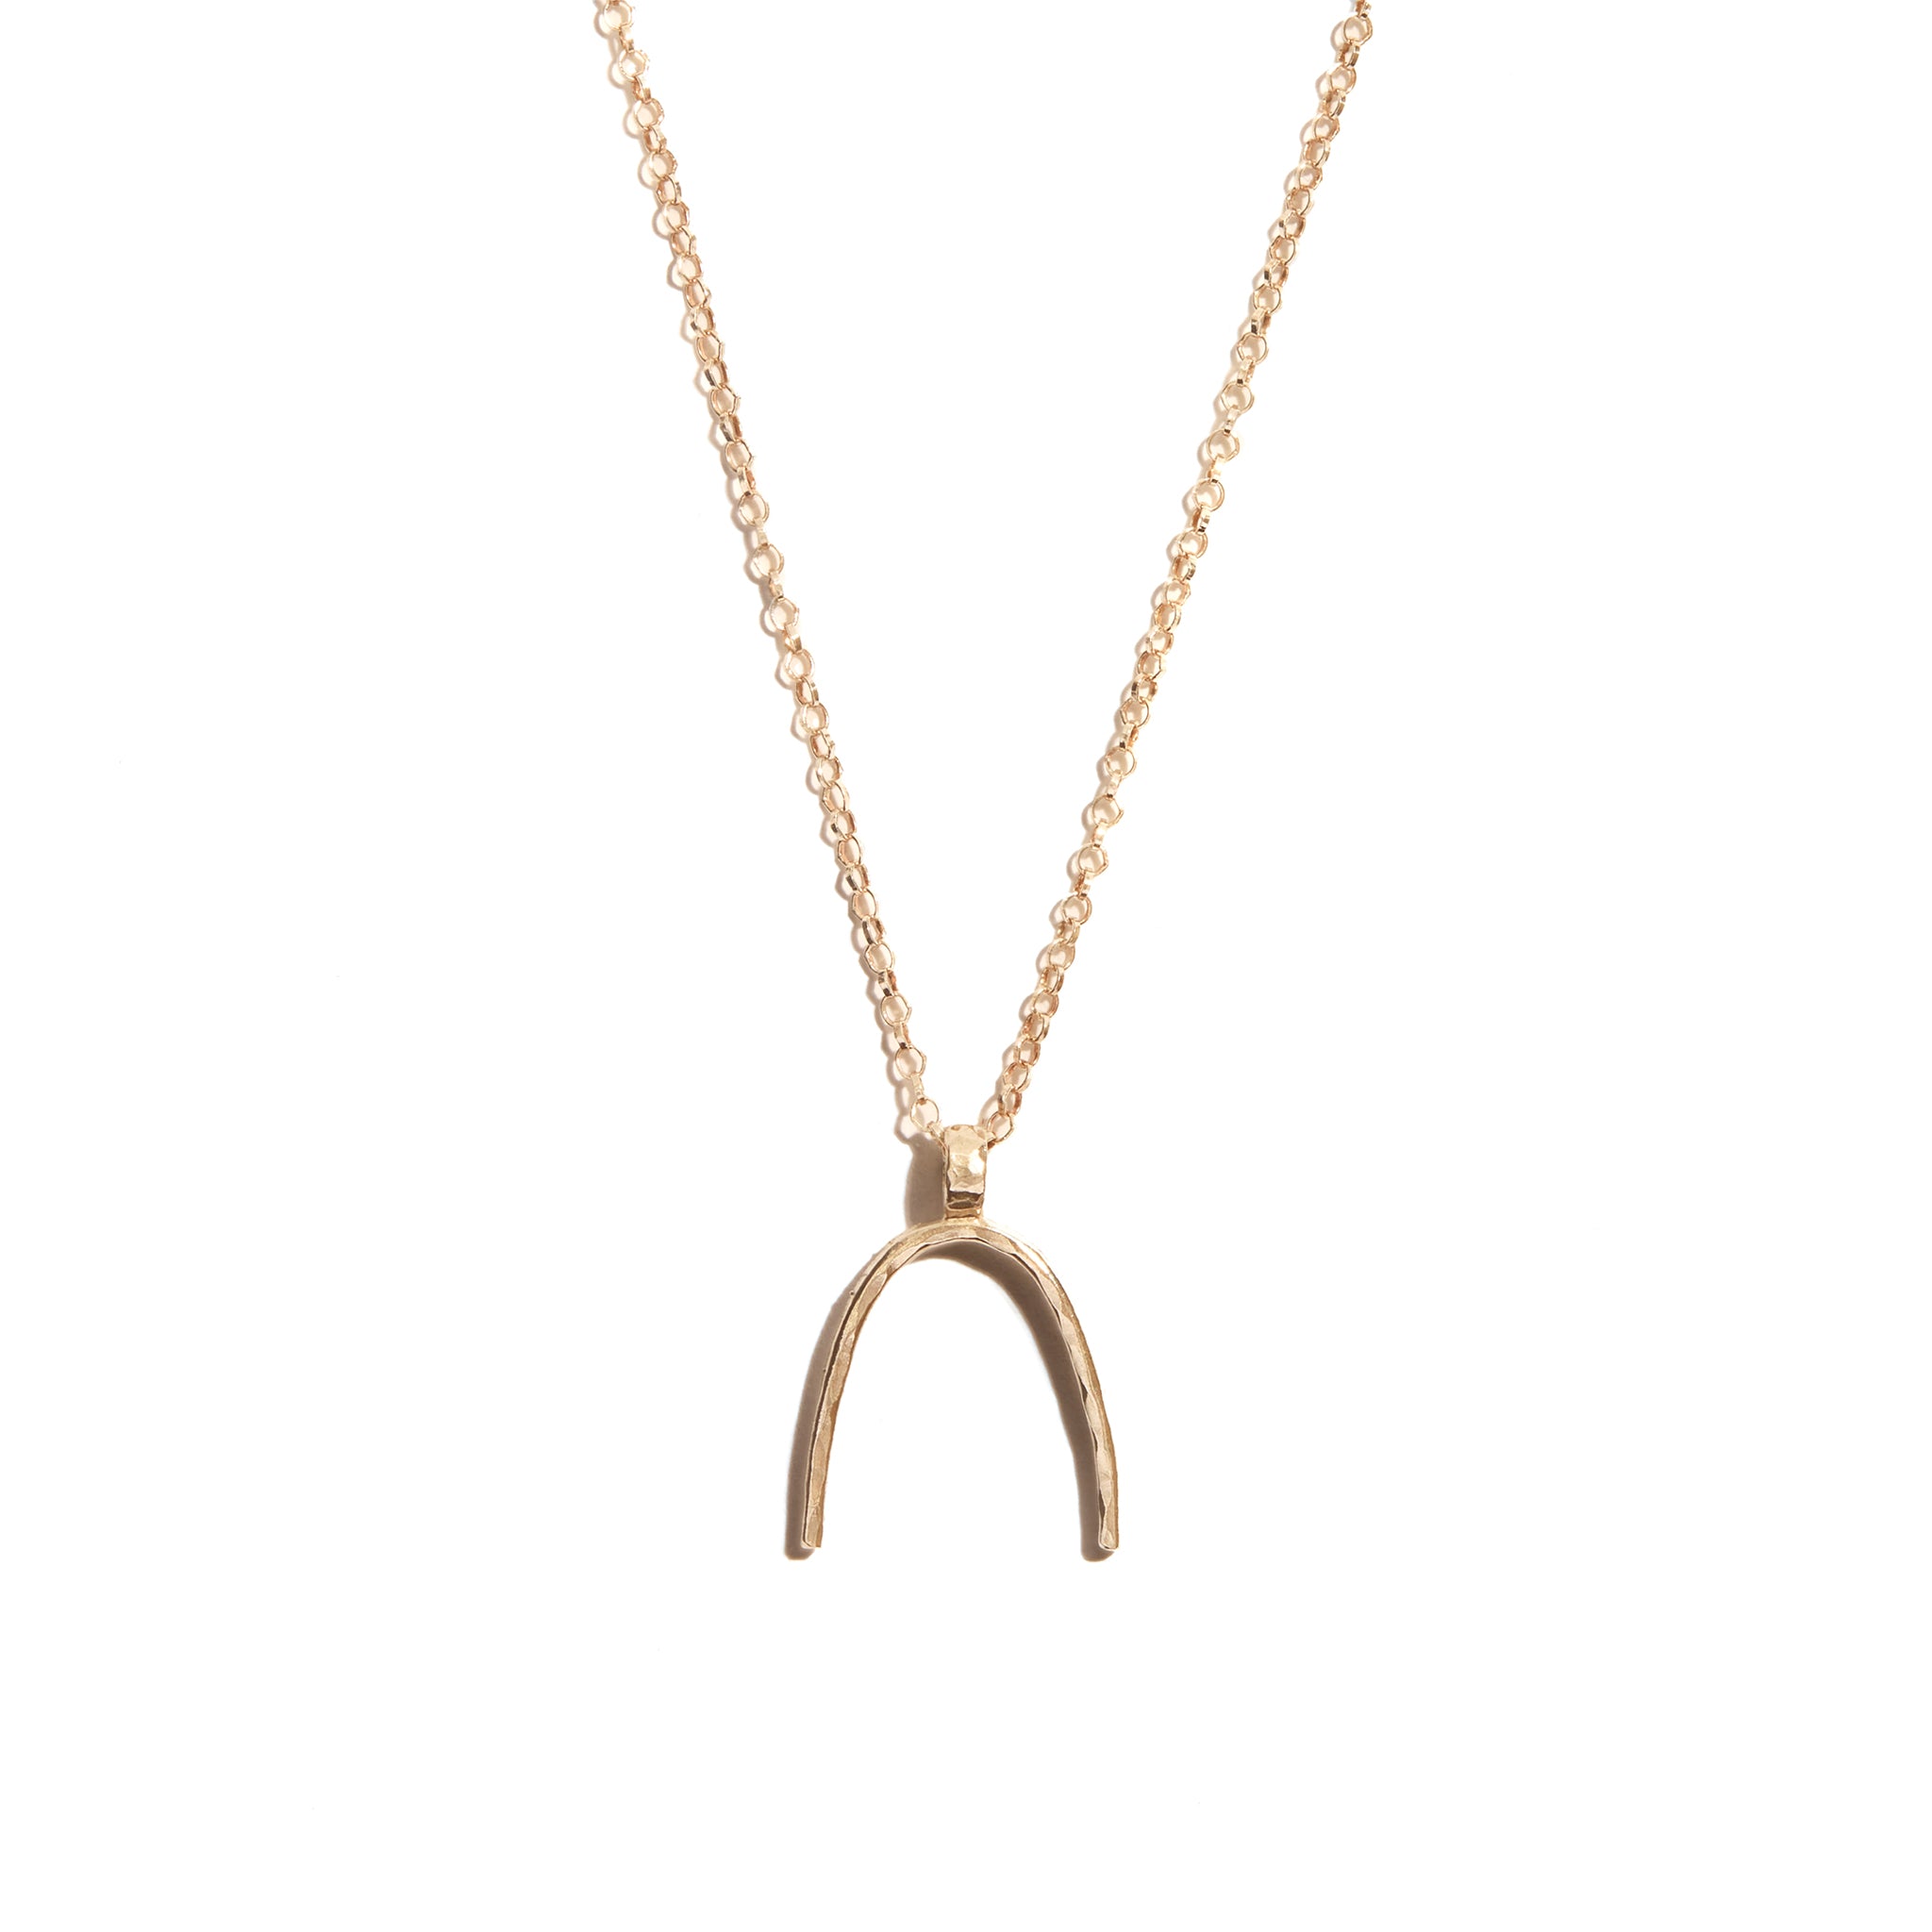 Elegant horse shoe pendant crafted from luxurious 14 carat gold-fill, symbolizing luck and style for any occasion.